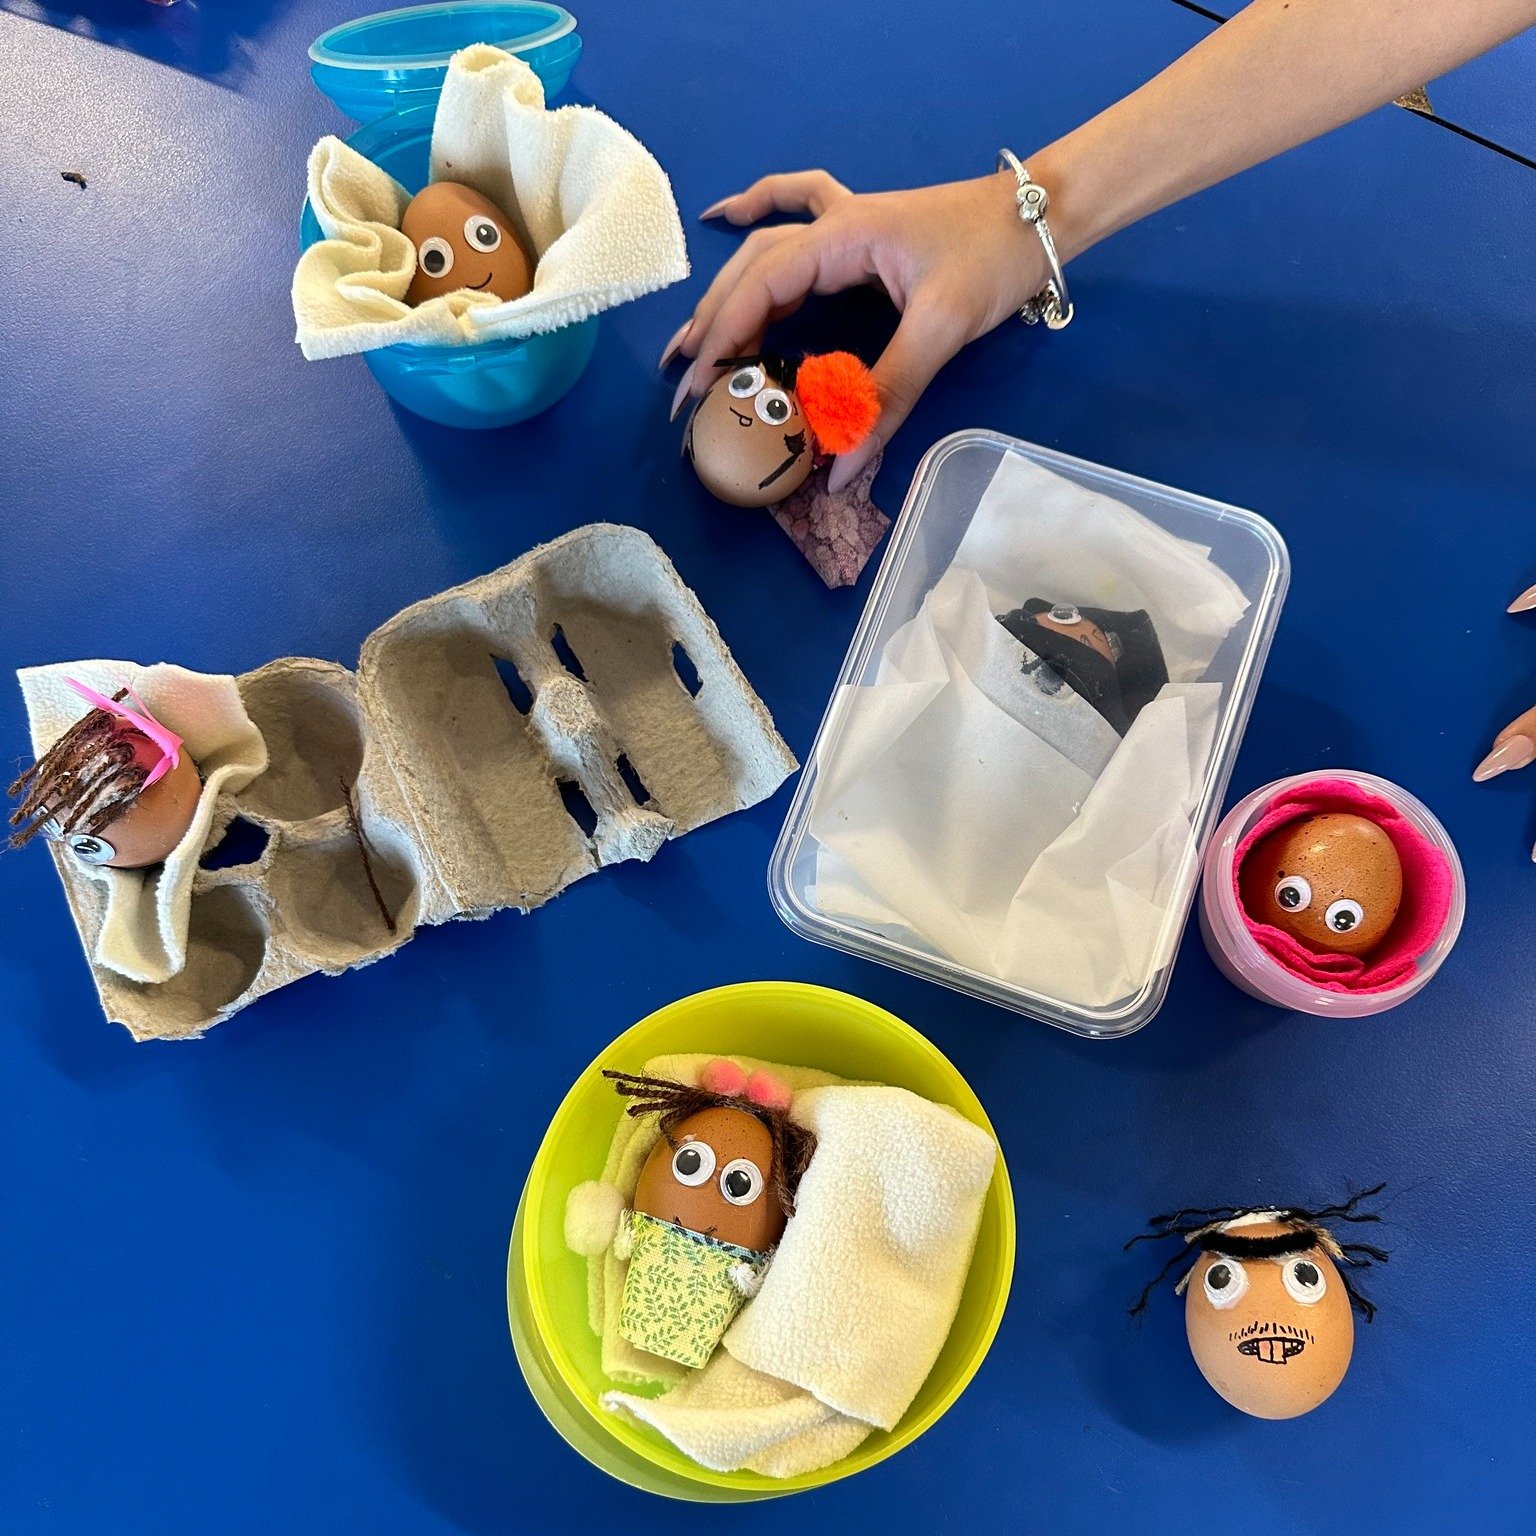 This week the FLE to Pre VCE Health class looked after their egg babies! Students were required to personalise their egg baby, care for it and complete diary entries identifying positive and negative experiences they faced each day. We think they all